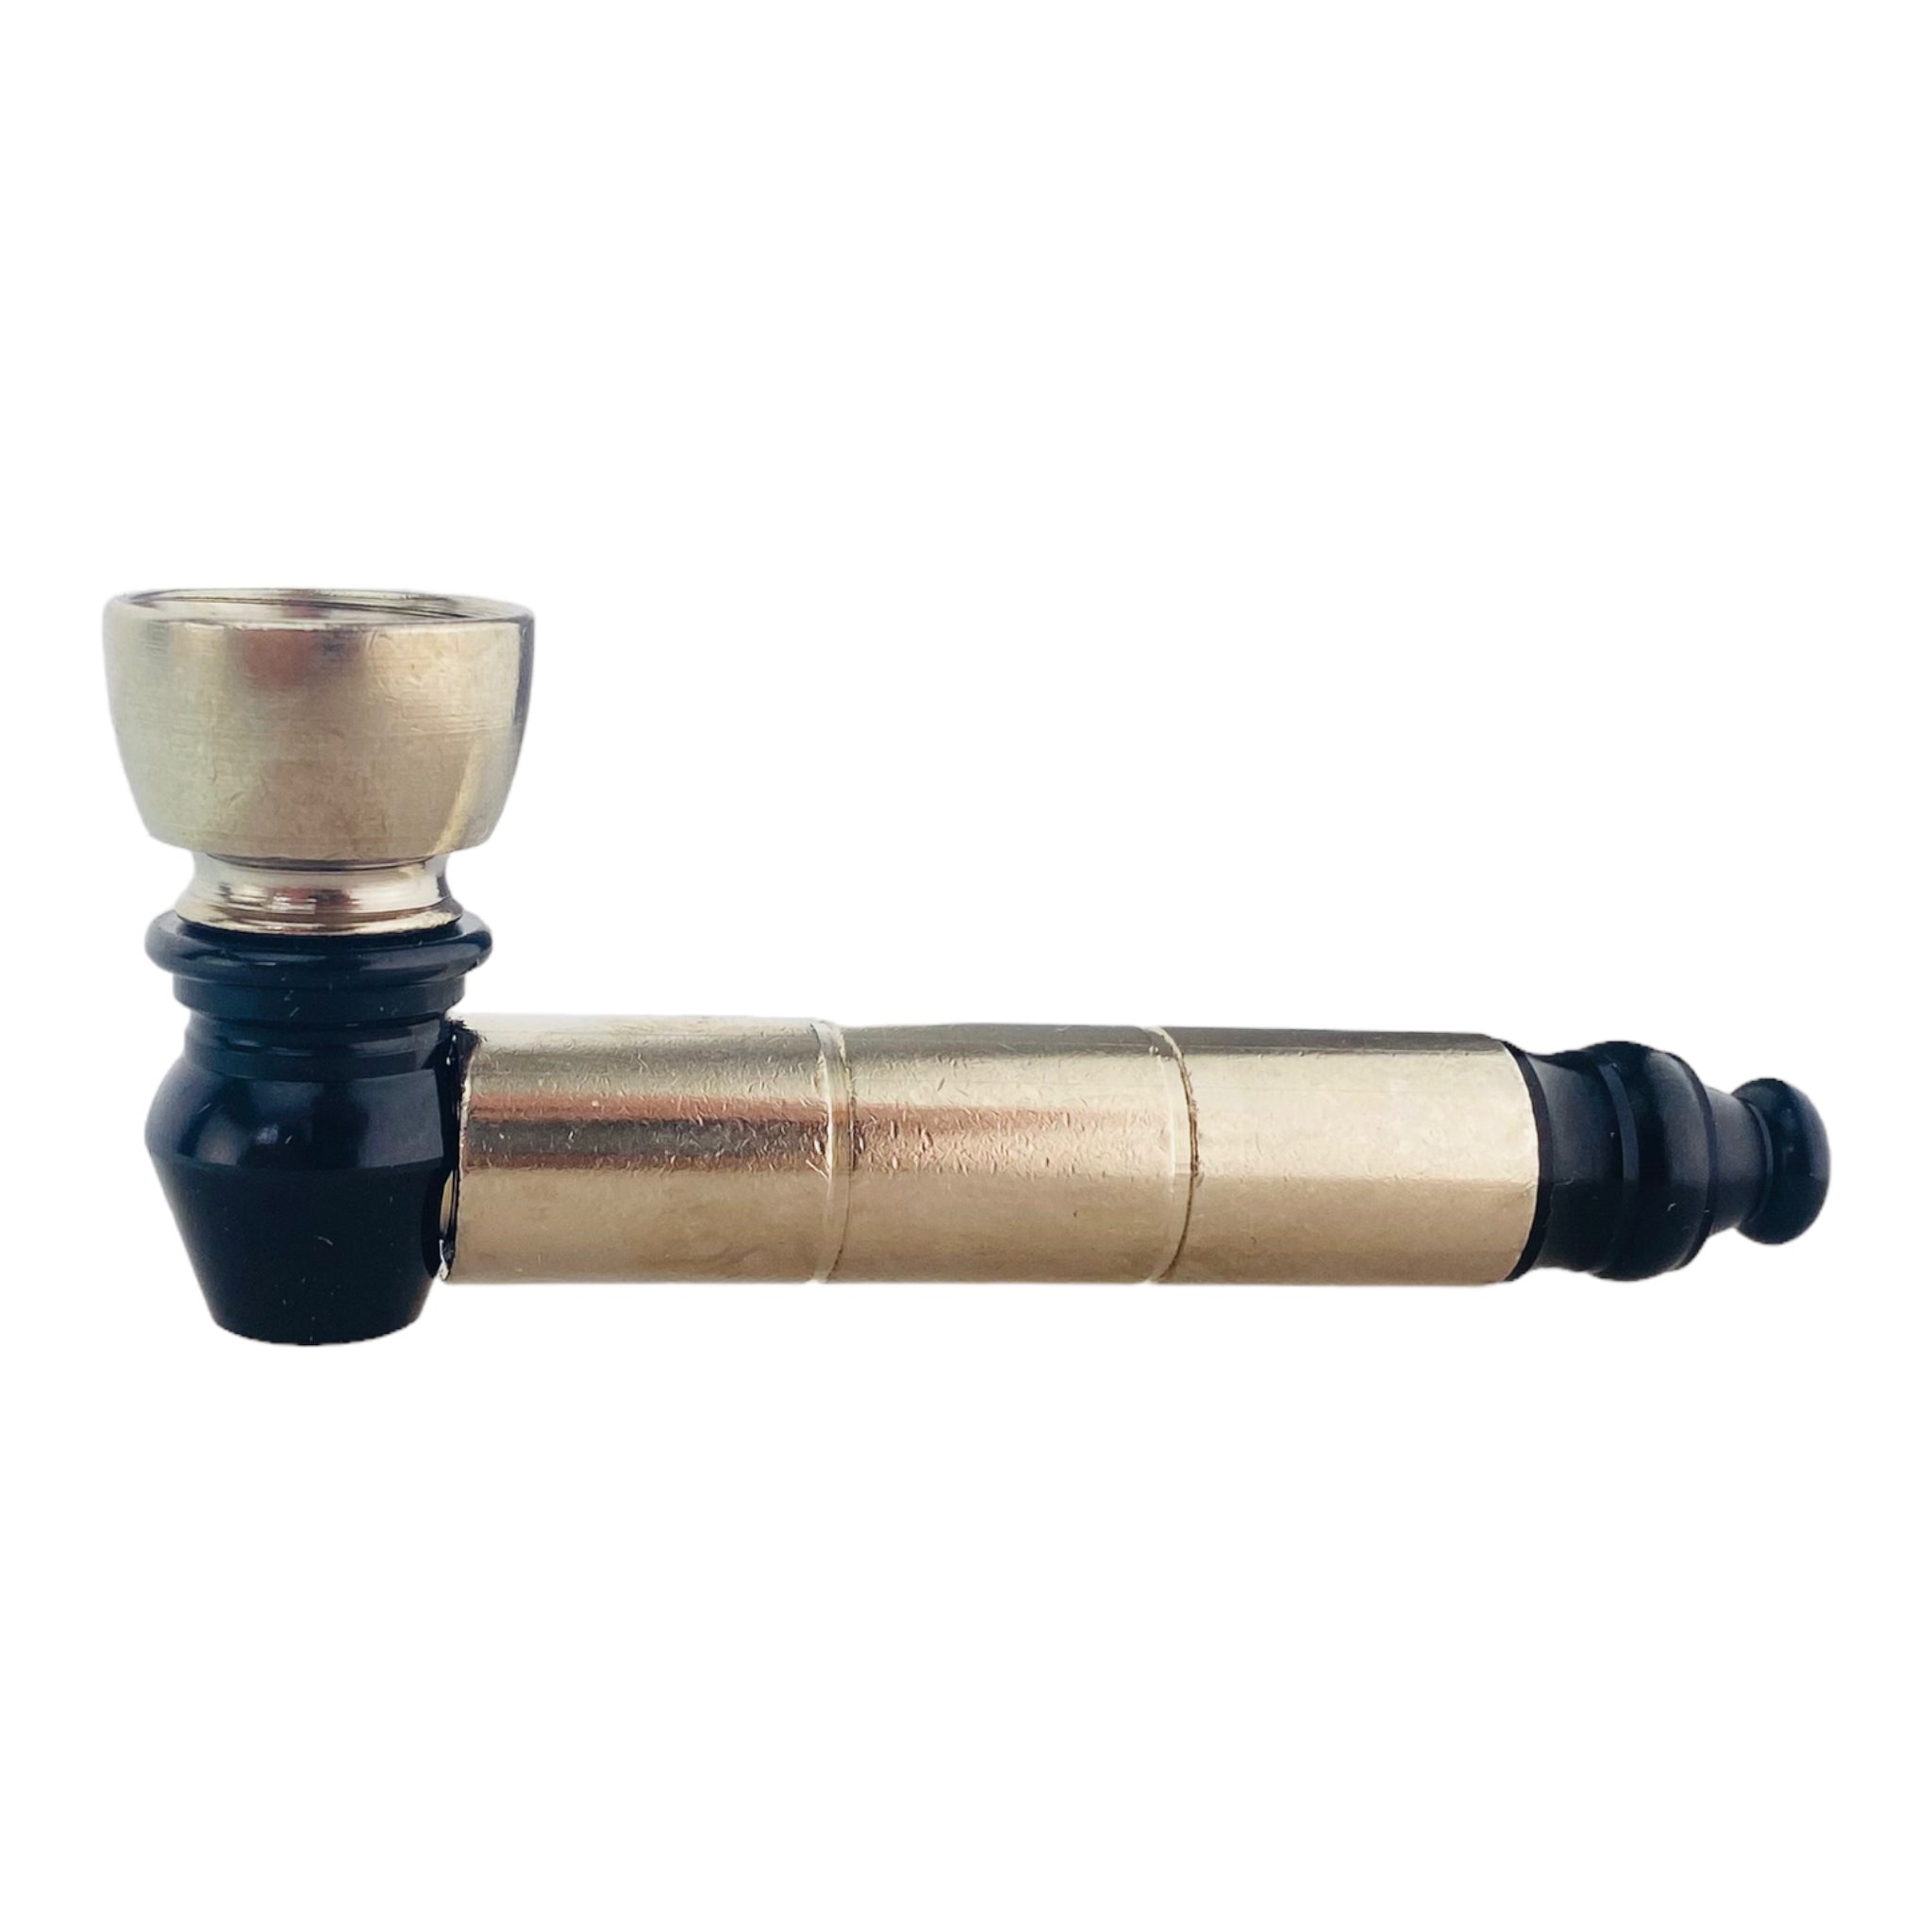 Metal Hand Pipes - Brass Pipe With Wood Bowl And Mouthpiece